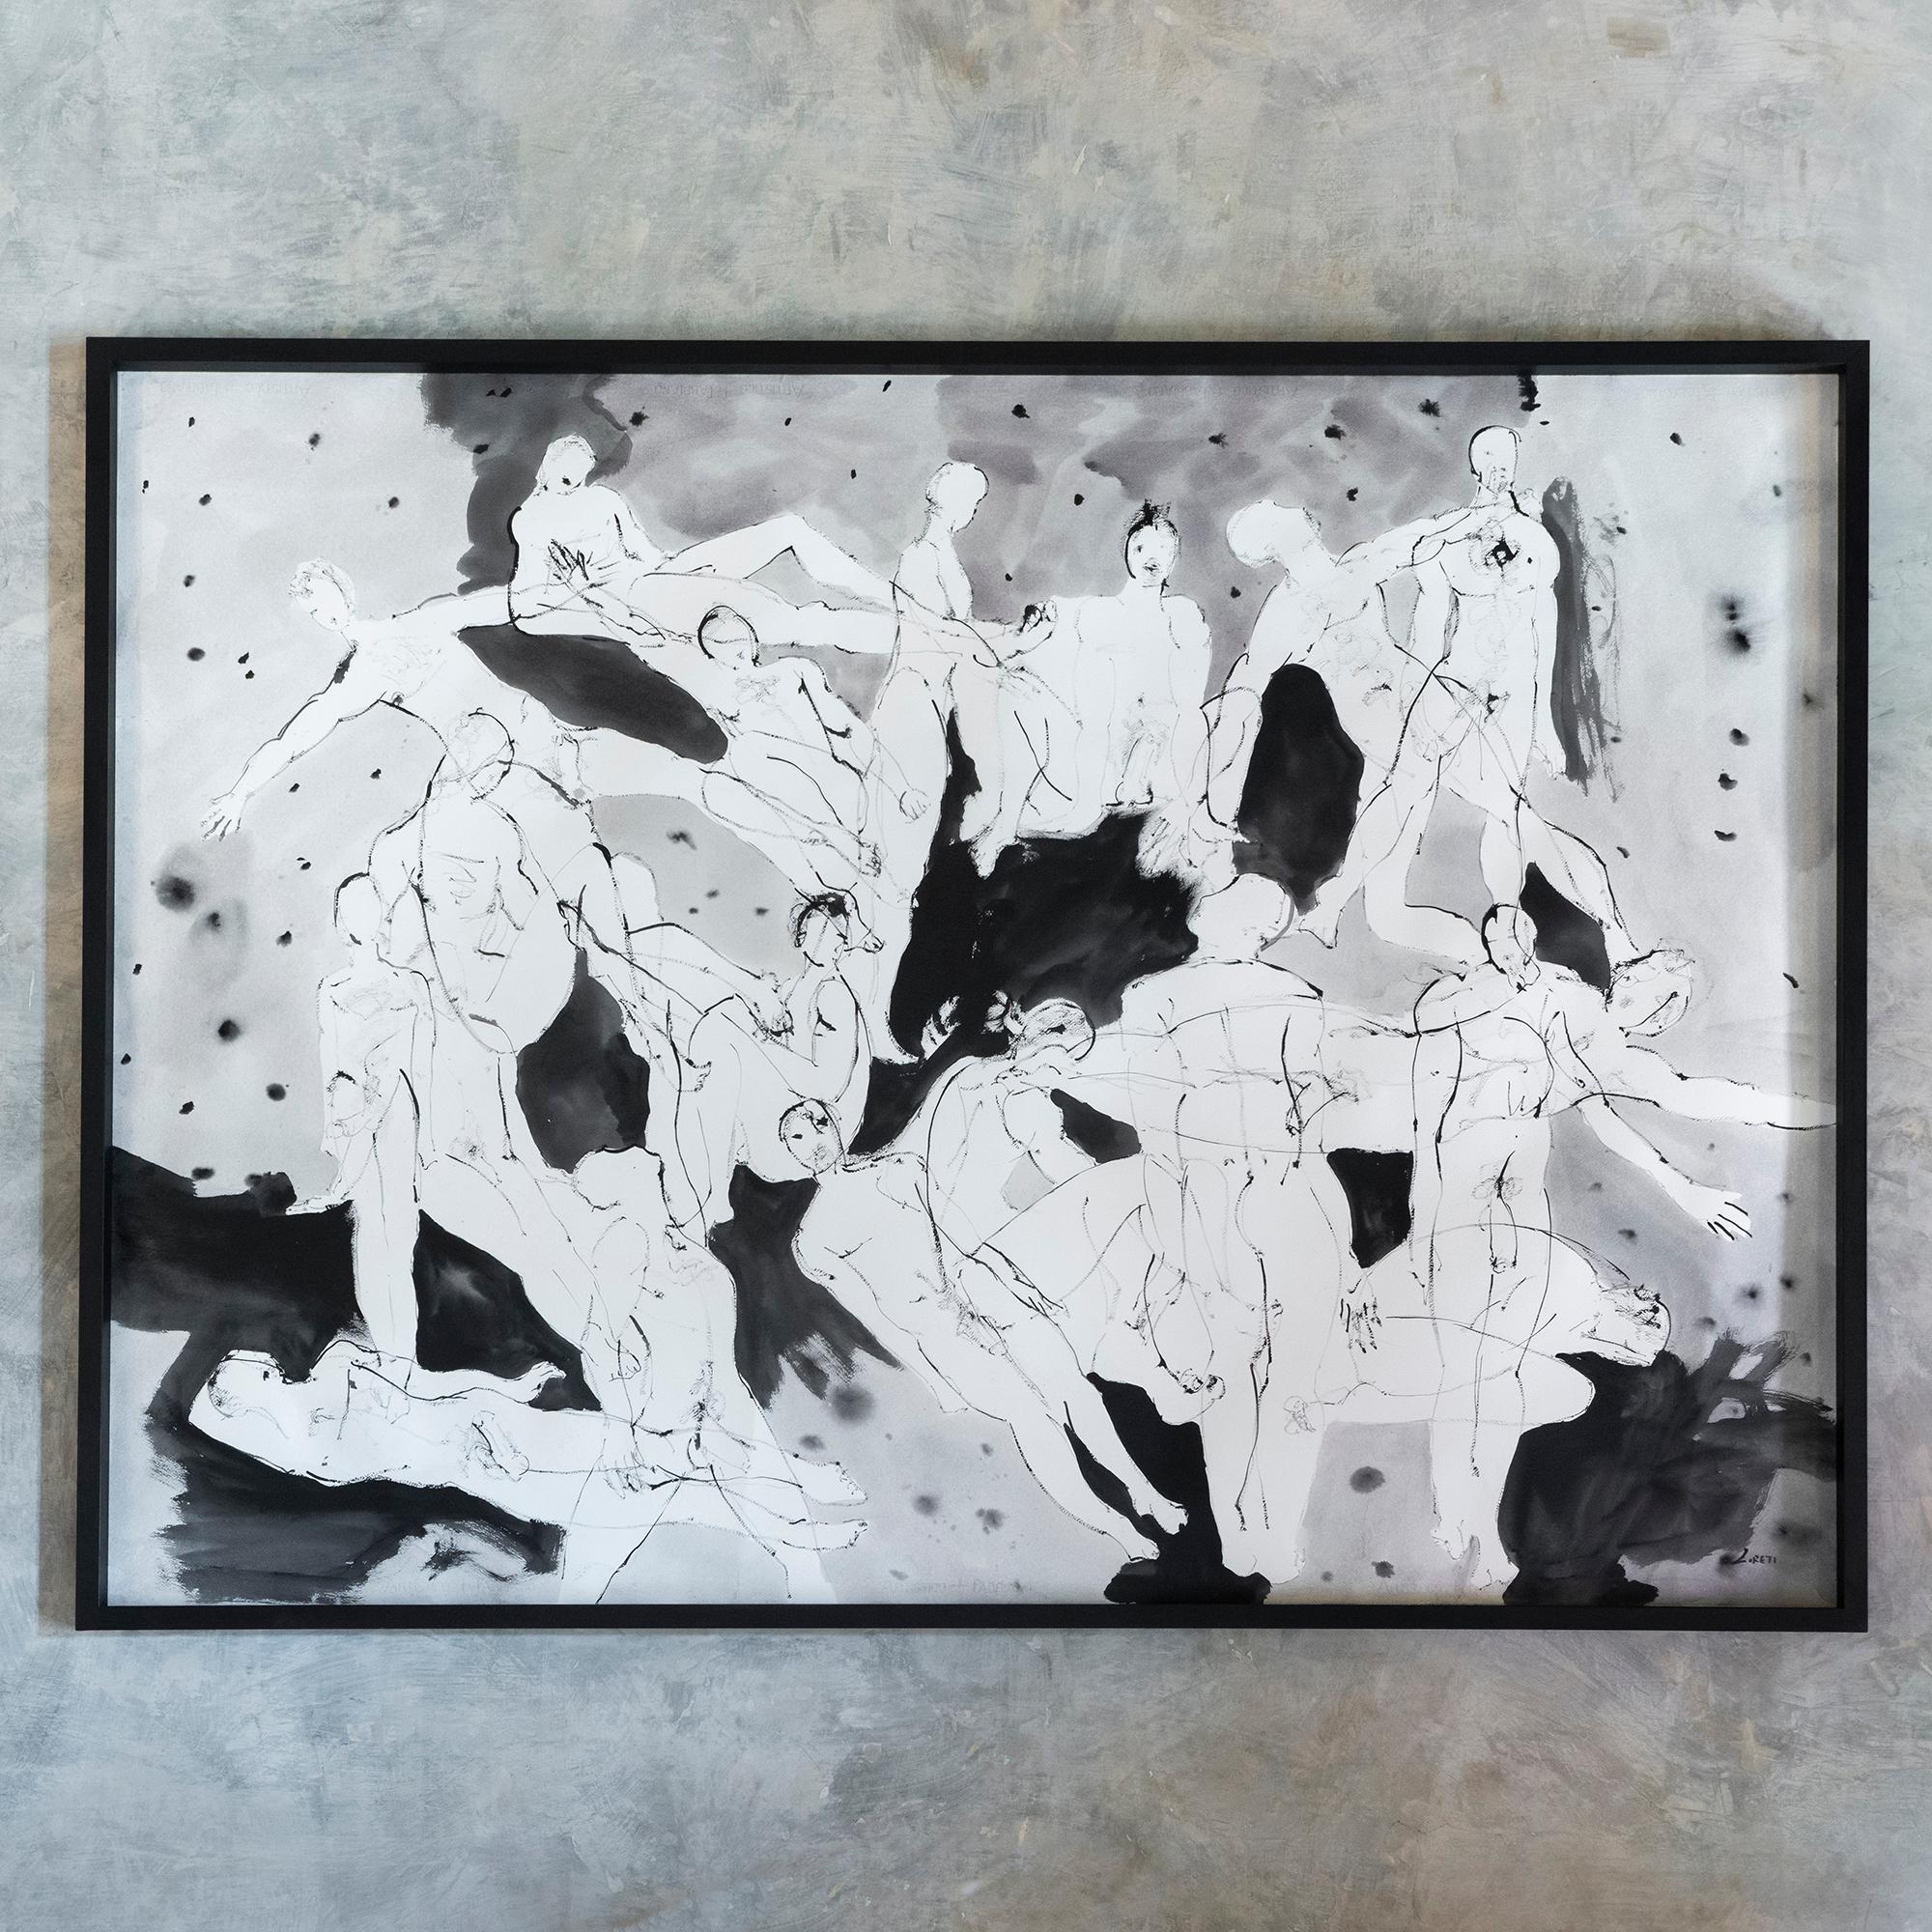 Decorative wall art, by the artist Alex Loreti, ink works on paper, monochromatic pictorial style typical of the figurative tradition of the Far East, which uses only black ink (Sumi) in various dilutions with water and brush, Italy, 2020.